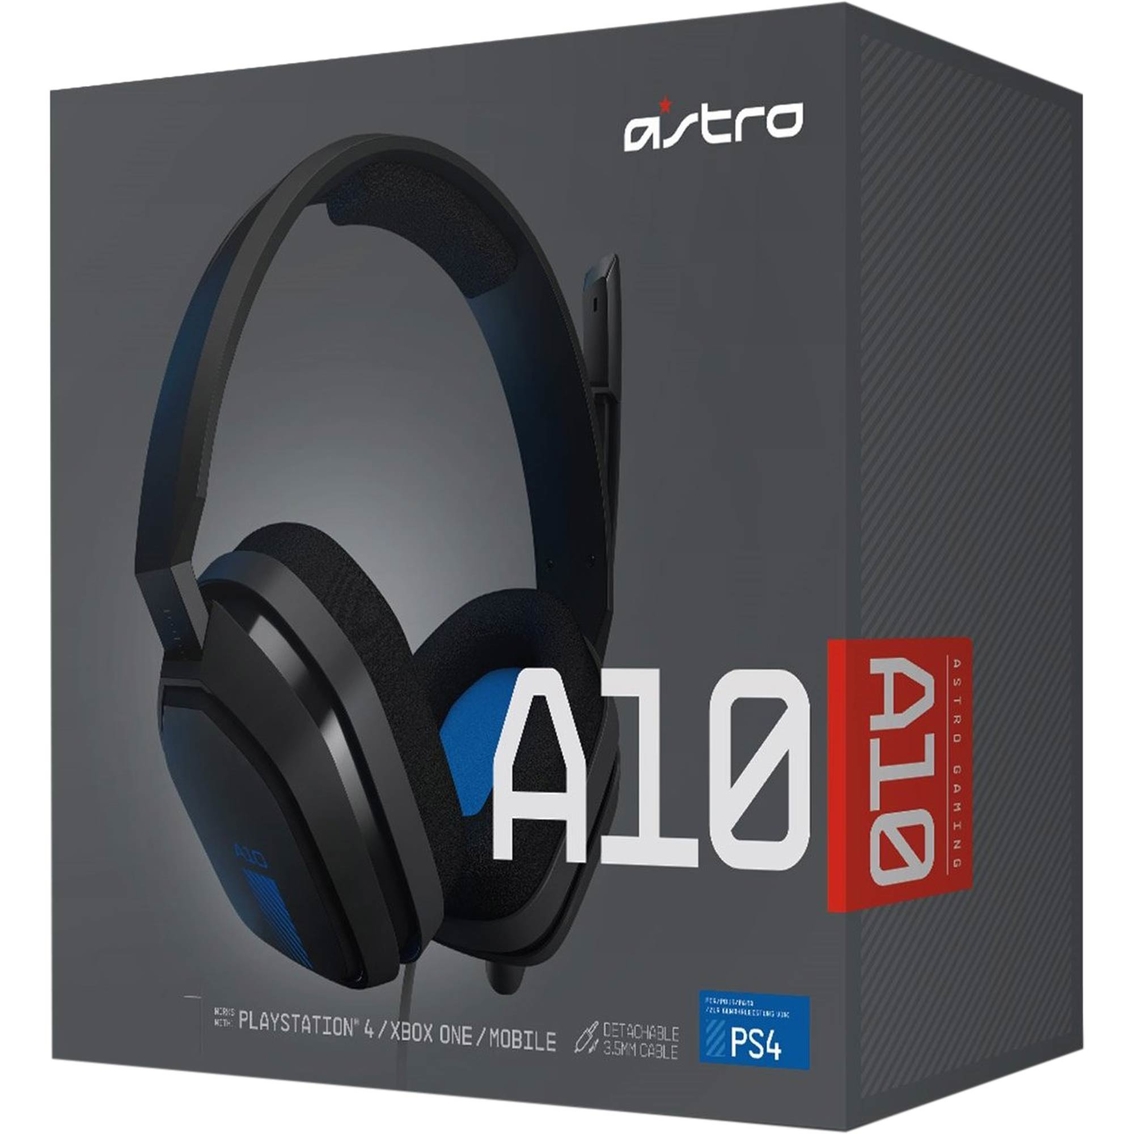 ASTRO A10 Headset (PS4) - Image 4 of 4